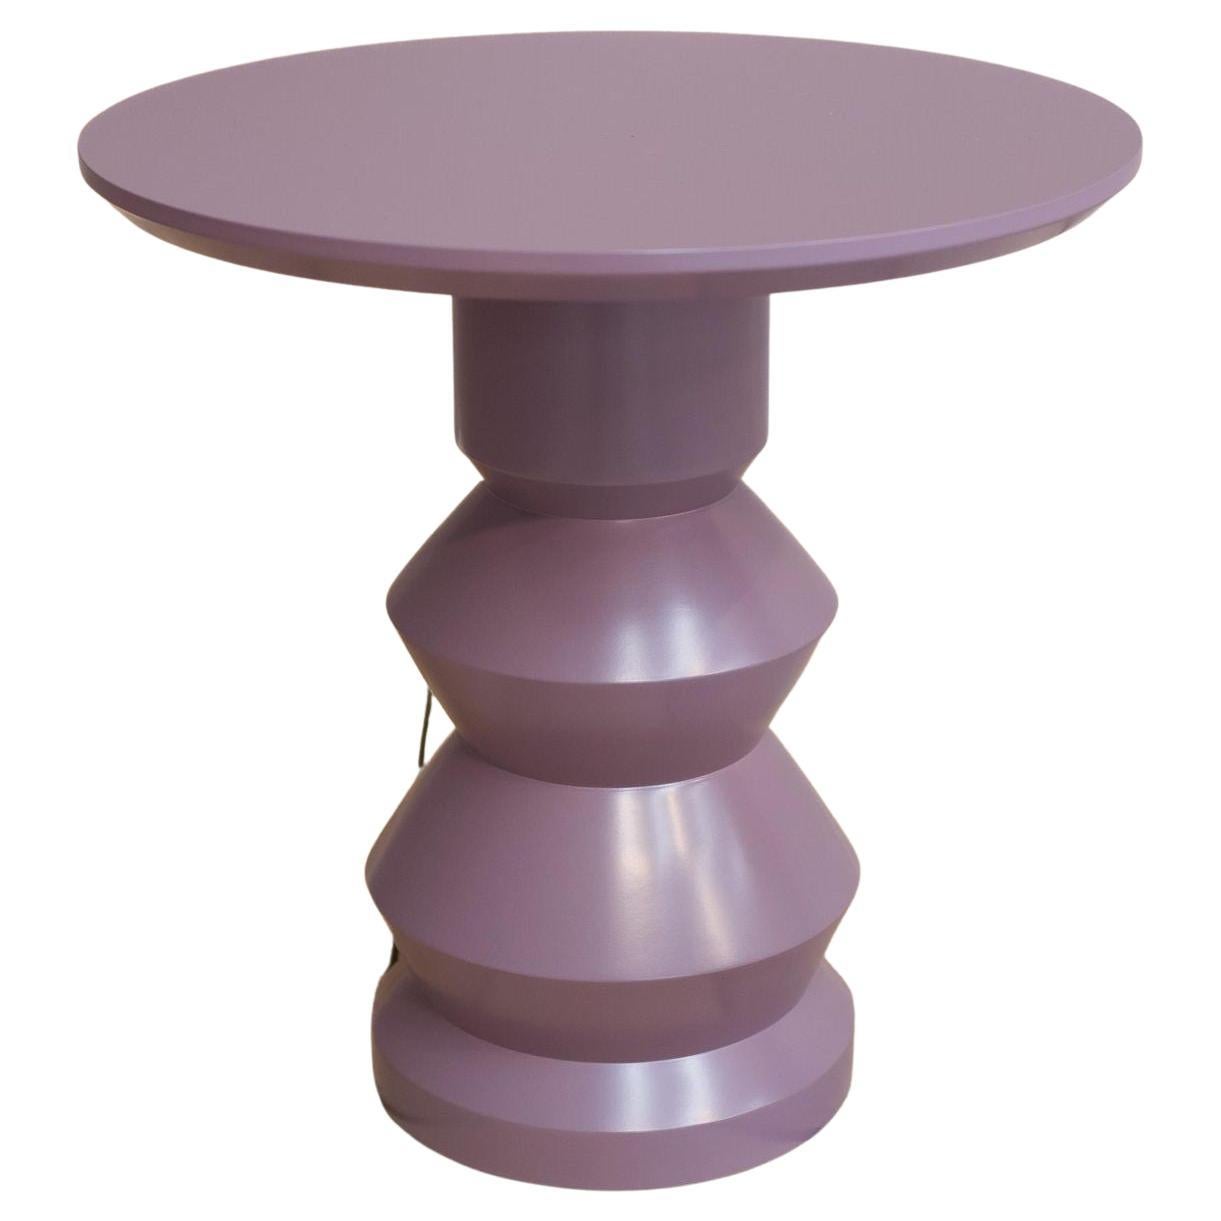 'Glen' Turned Wood Lacquered Side Table, Heather For Sale